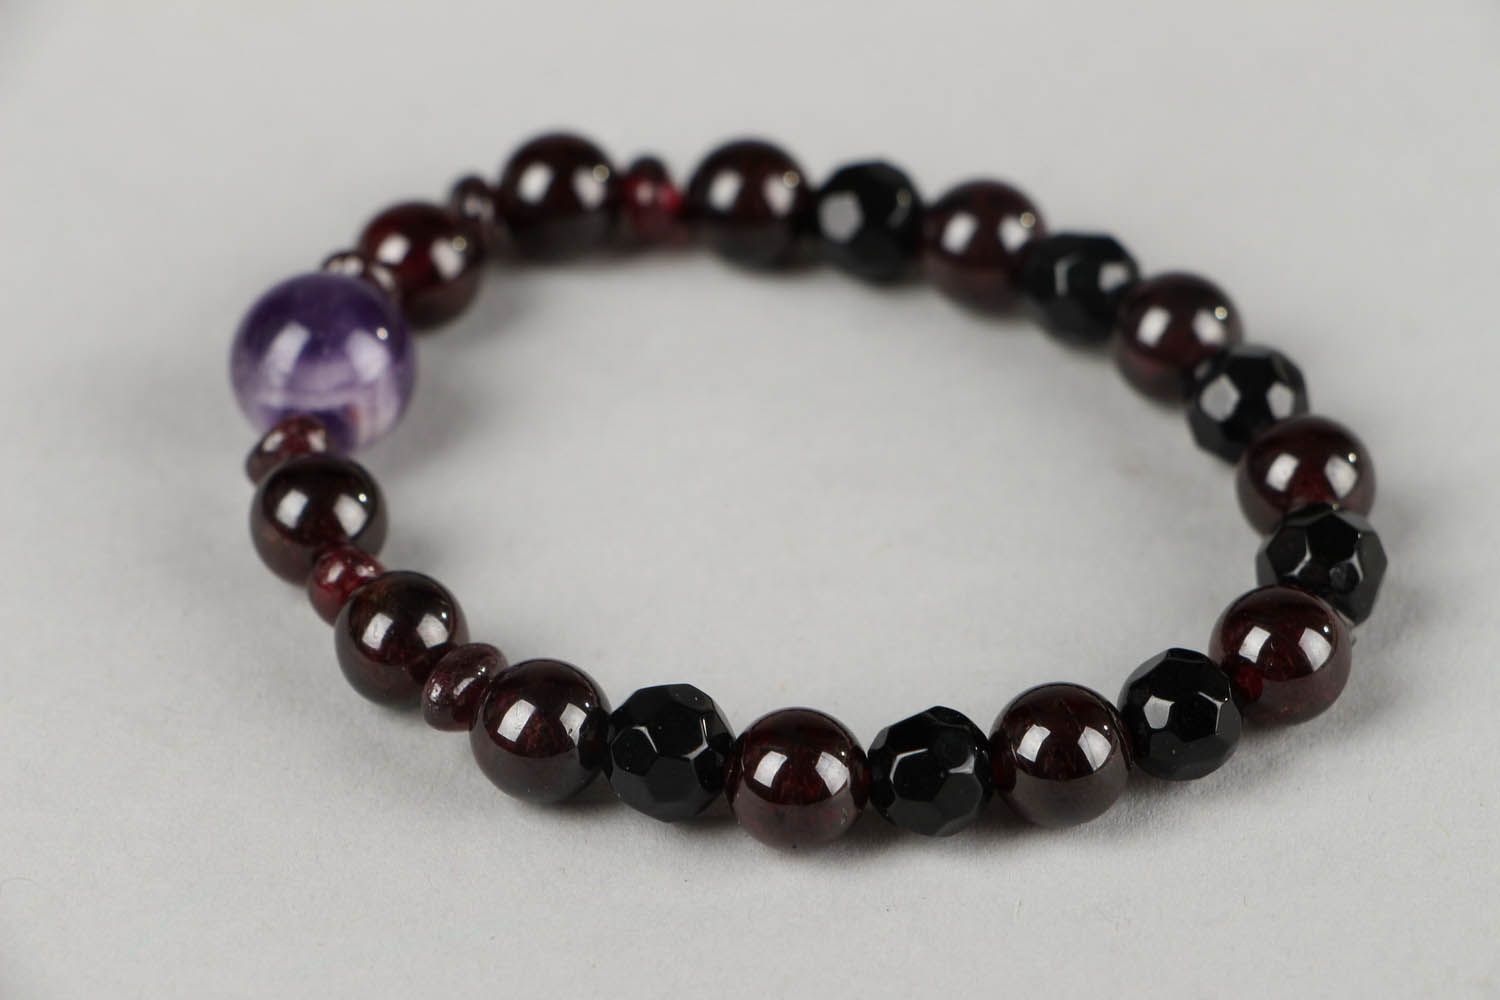 Bracelet made of glass and natural stones photo 2